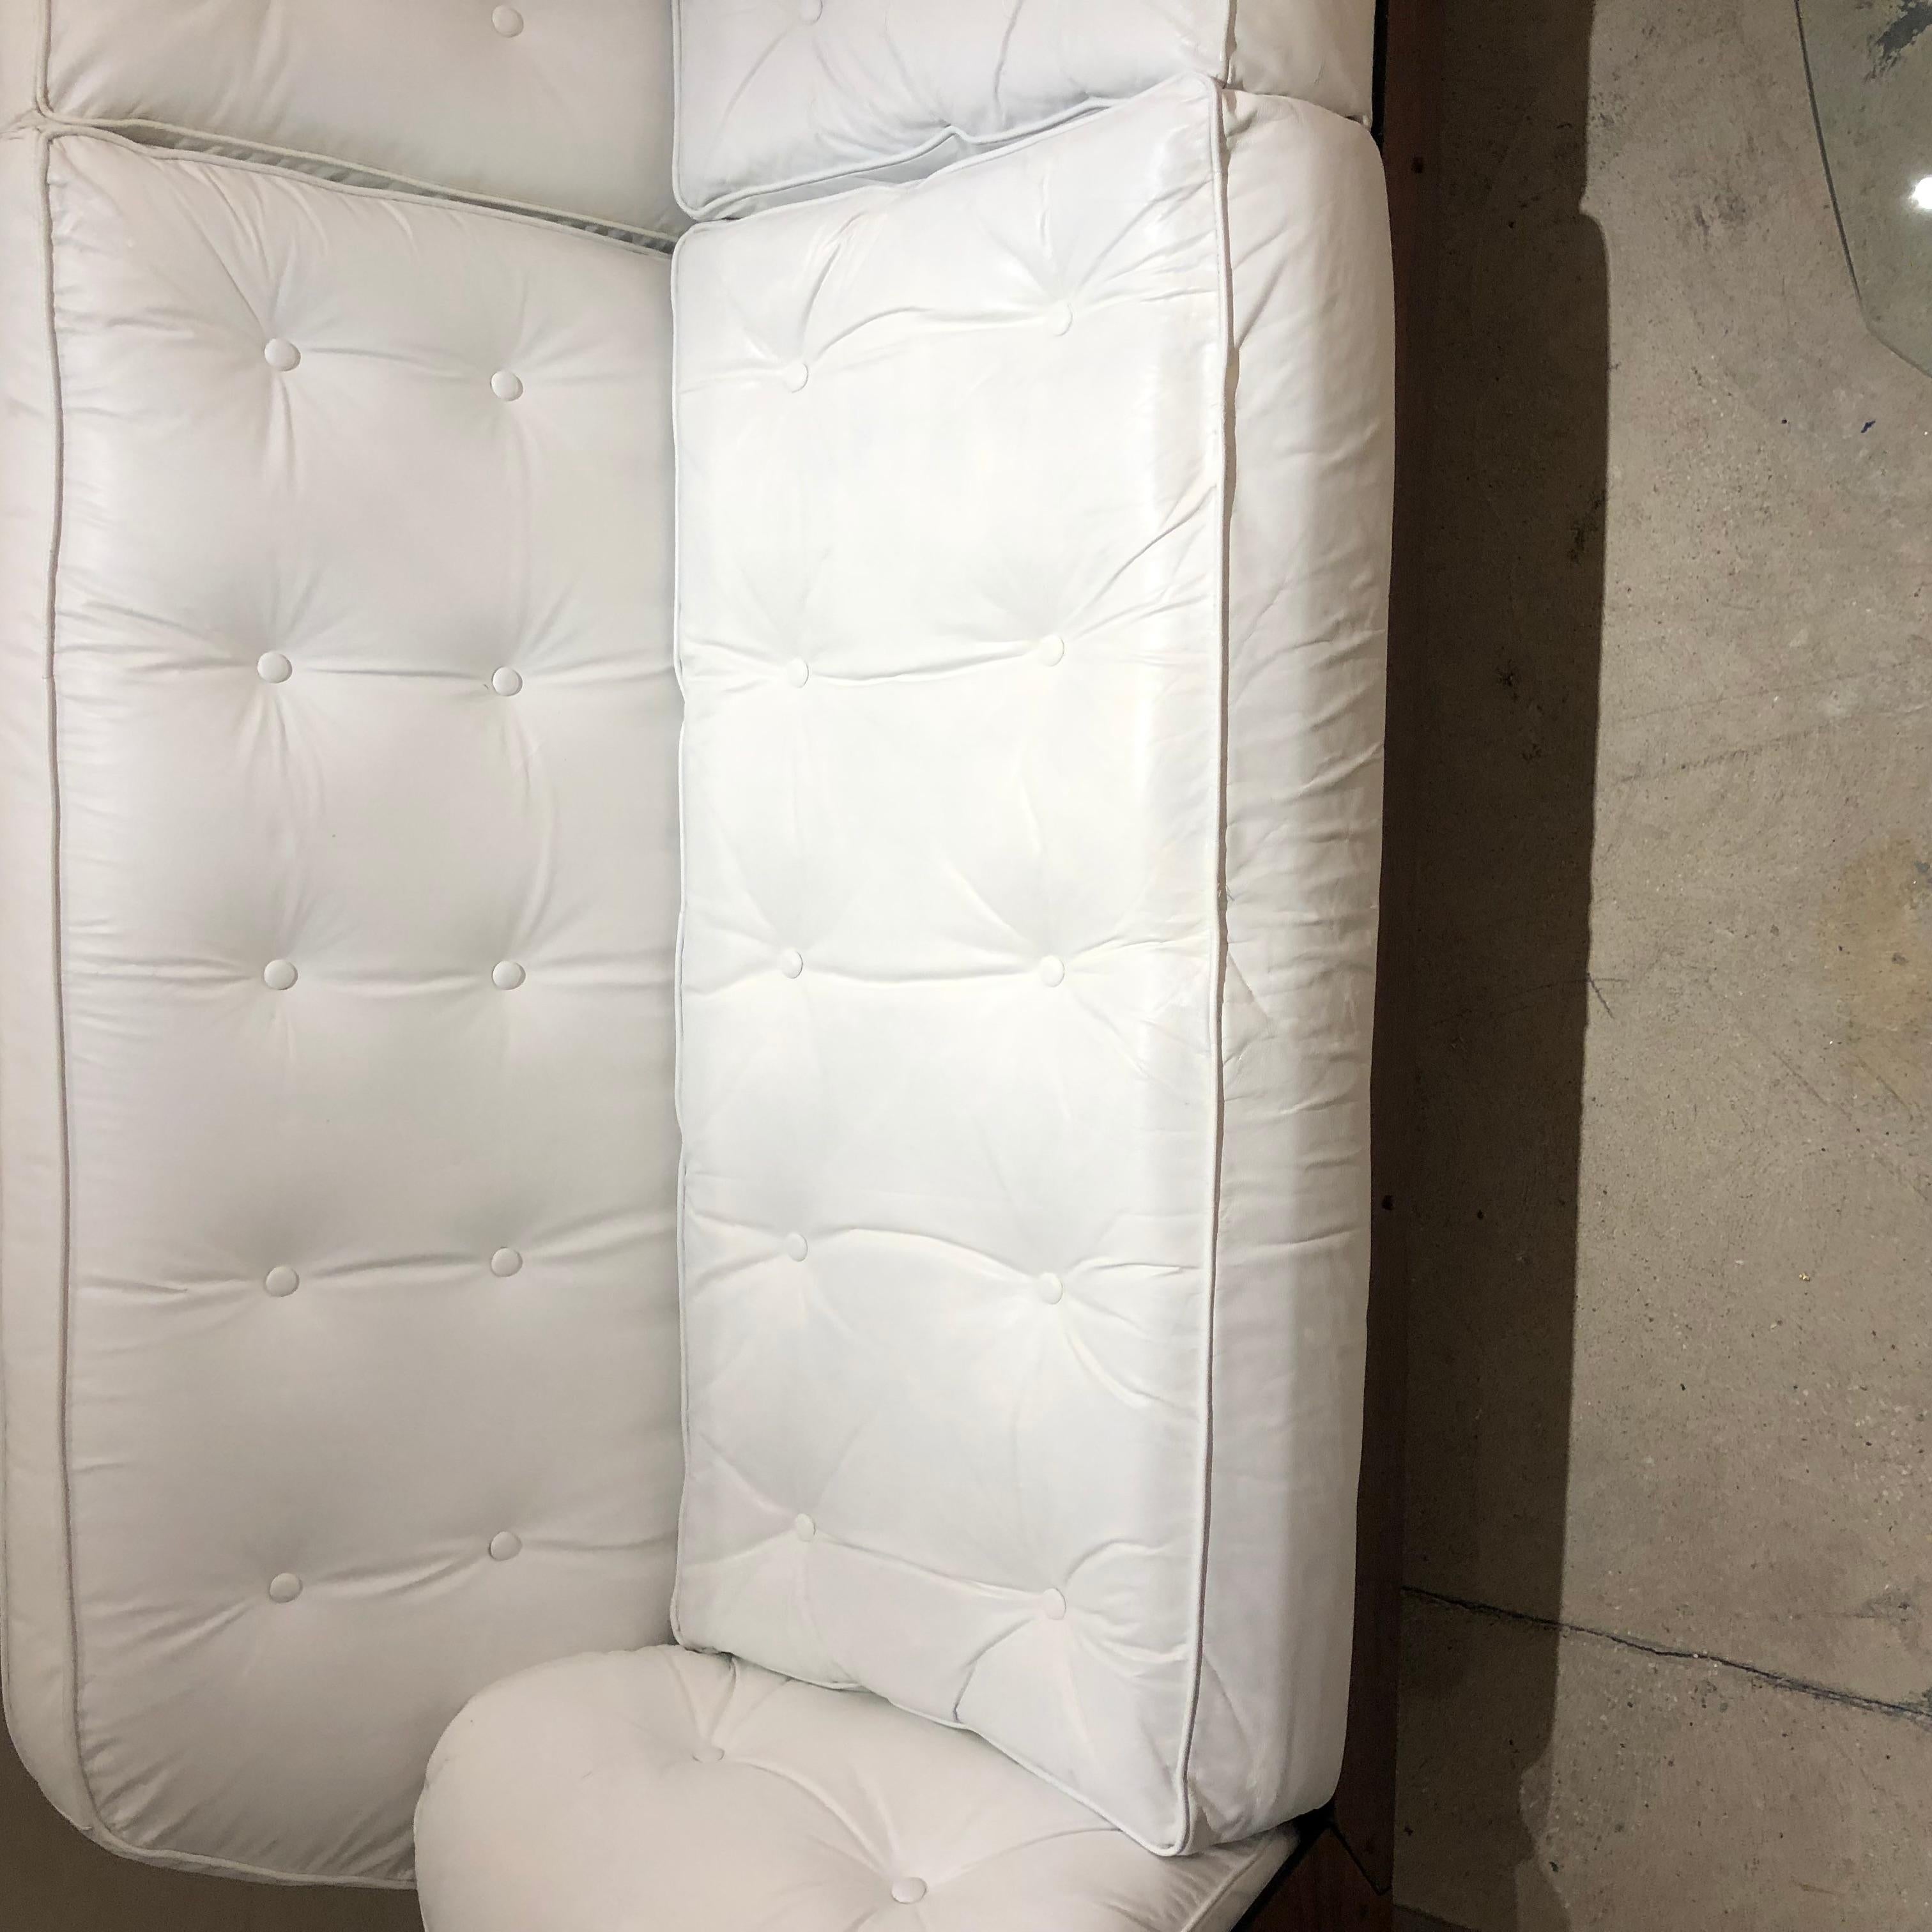 Aluminum Sofa in Jacaranda and White Leather by J.D. Moveis e Decoracoes